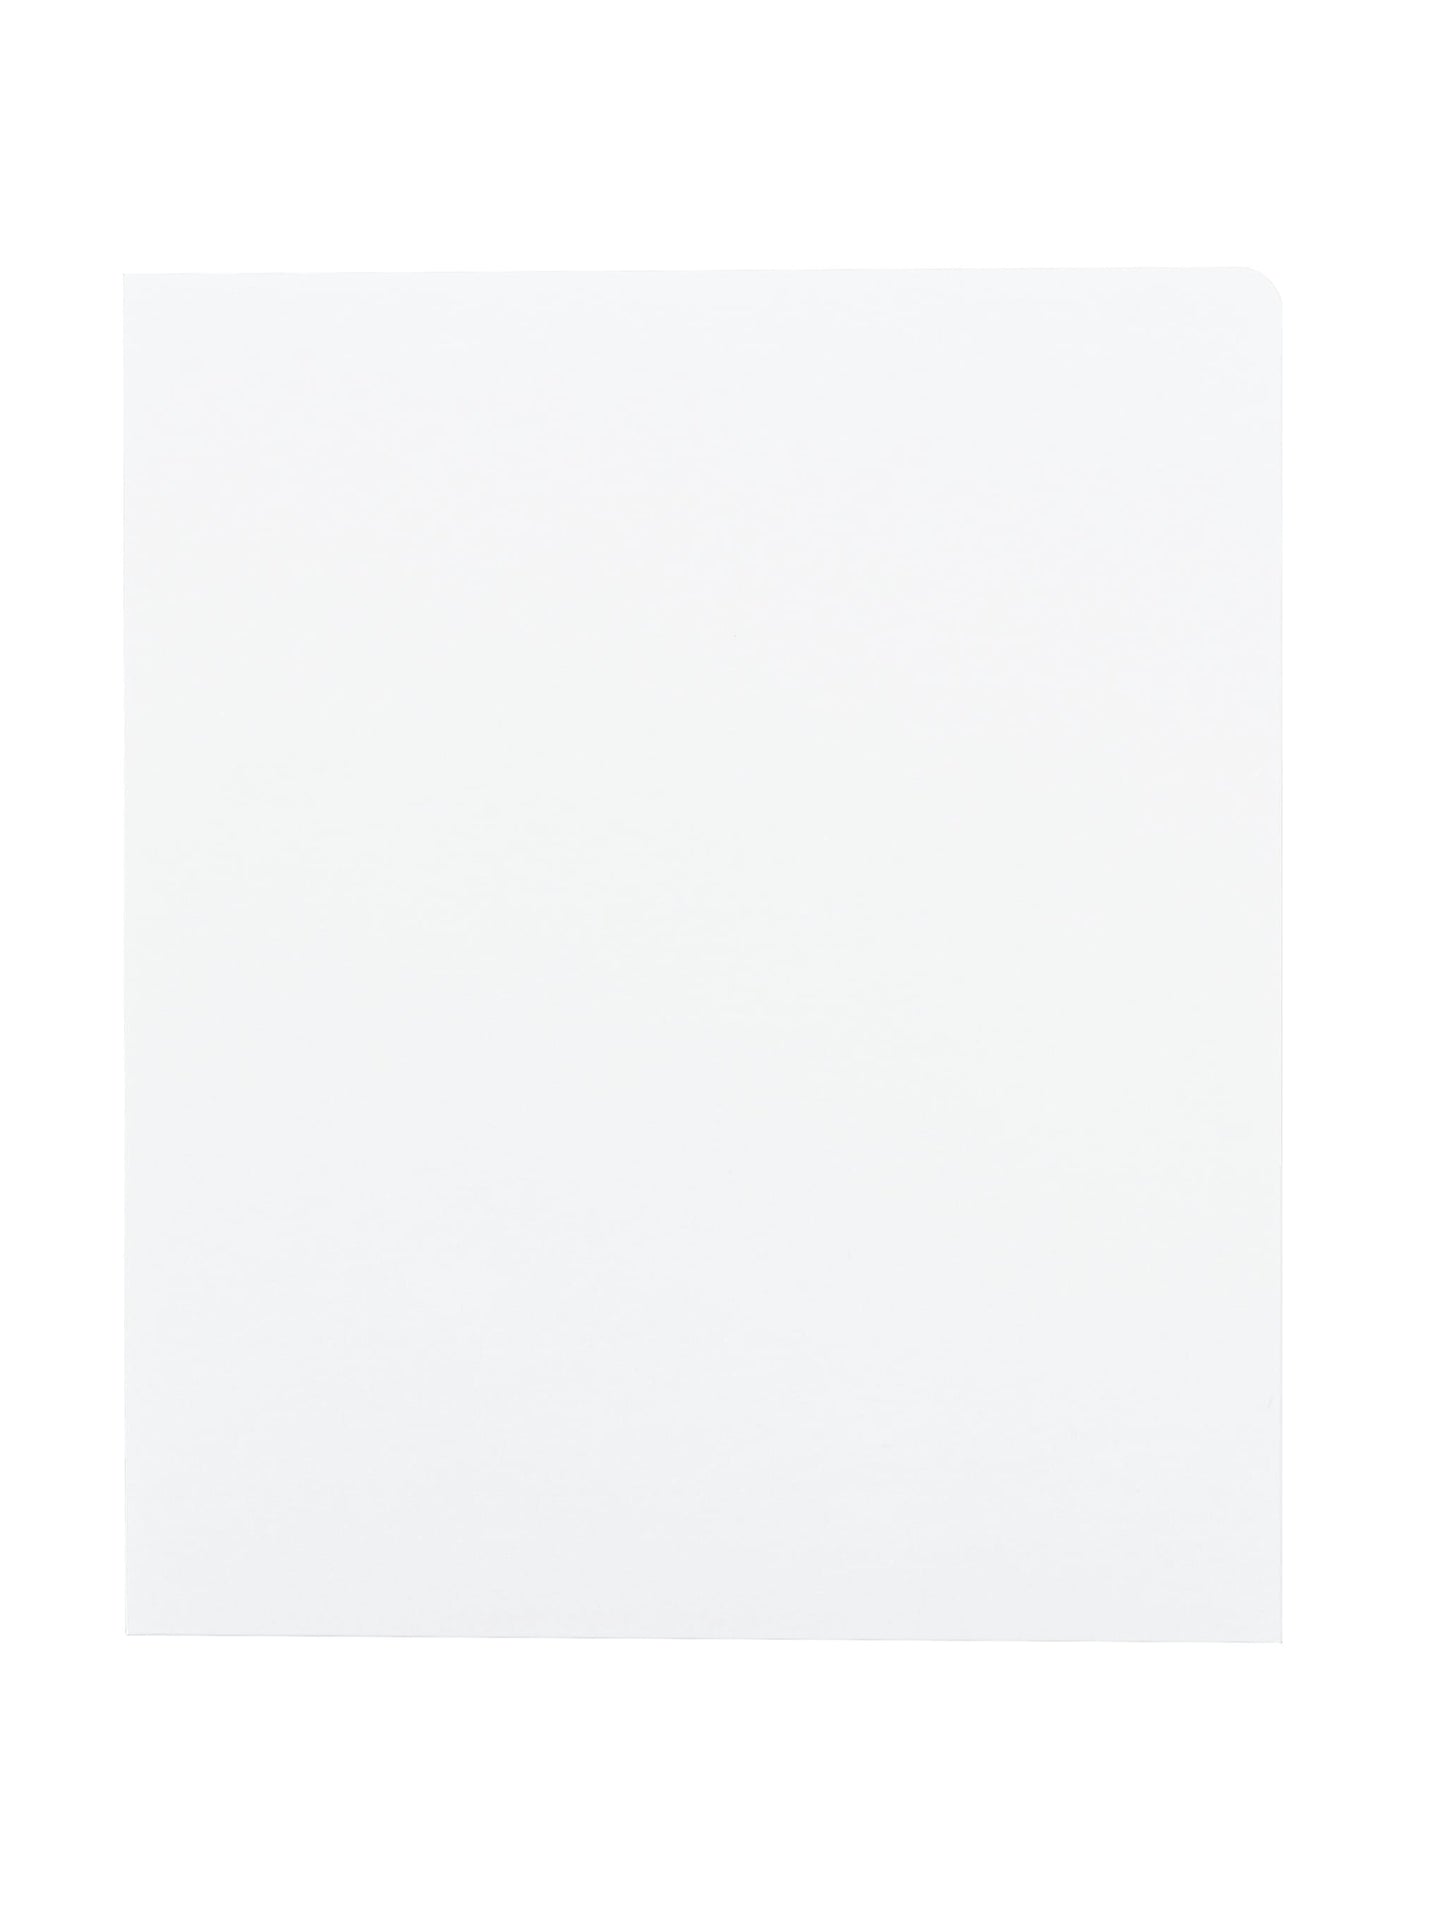 High Gloss Two-Pocket Folders, White Color, Letter Size, 30086486878839